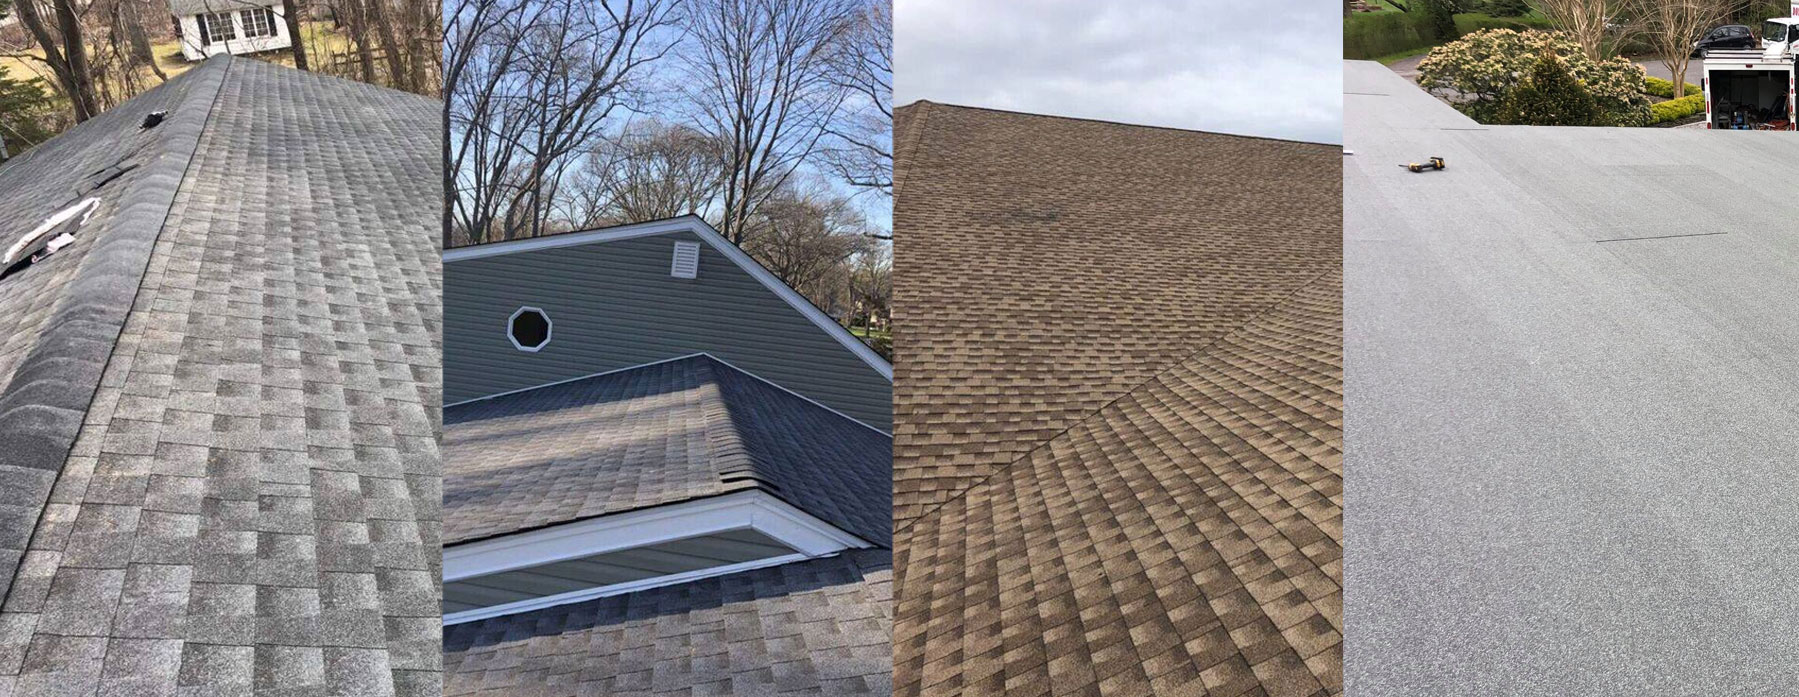 Roof Repair Near East Marion NY 11939